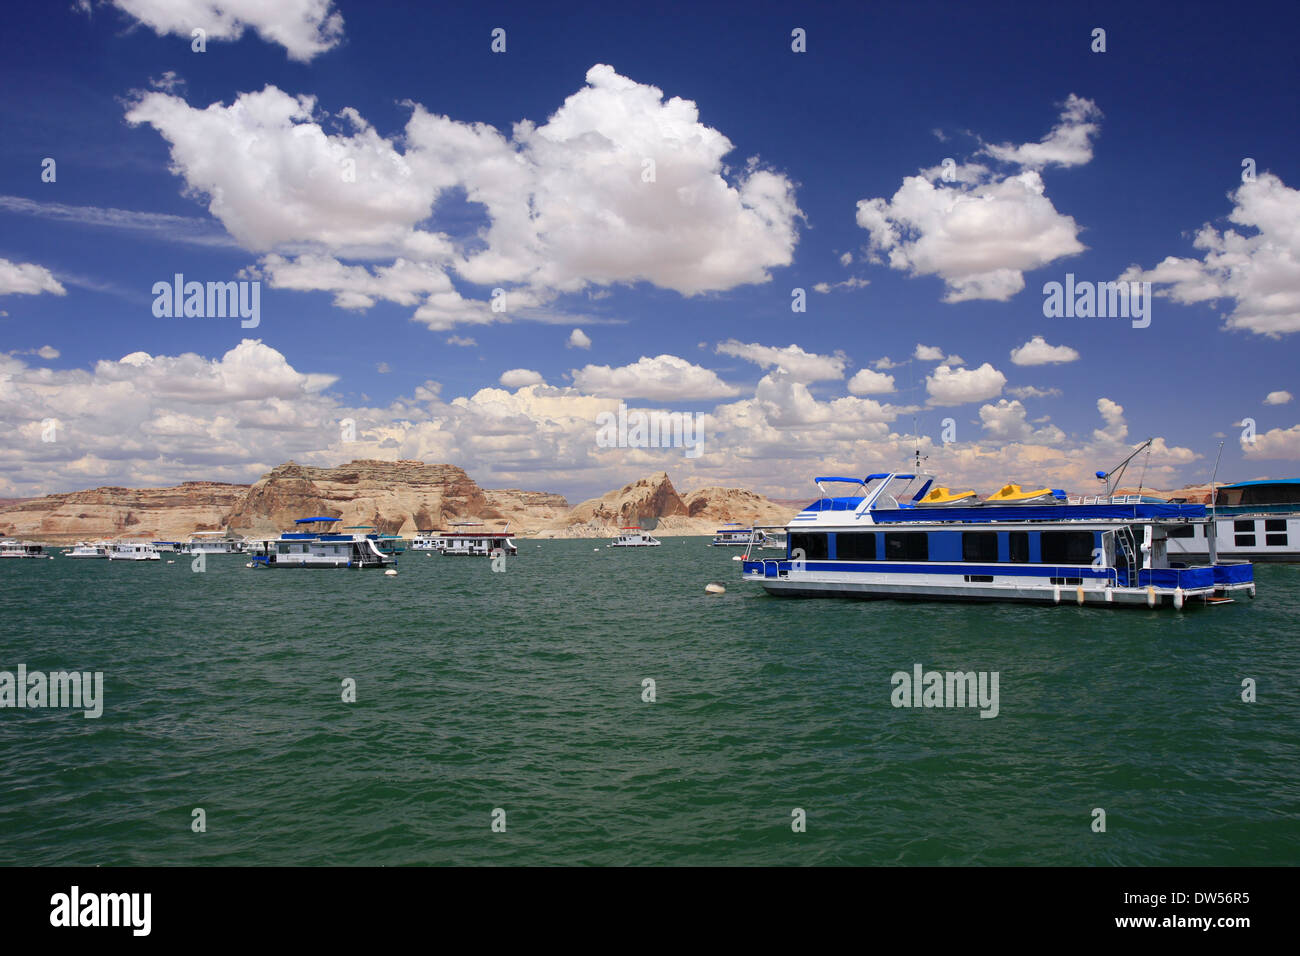 Lake Powell houseboats Banque D'Images